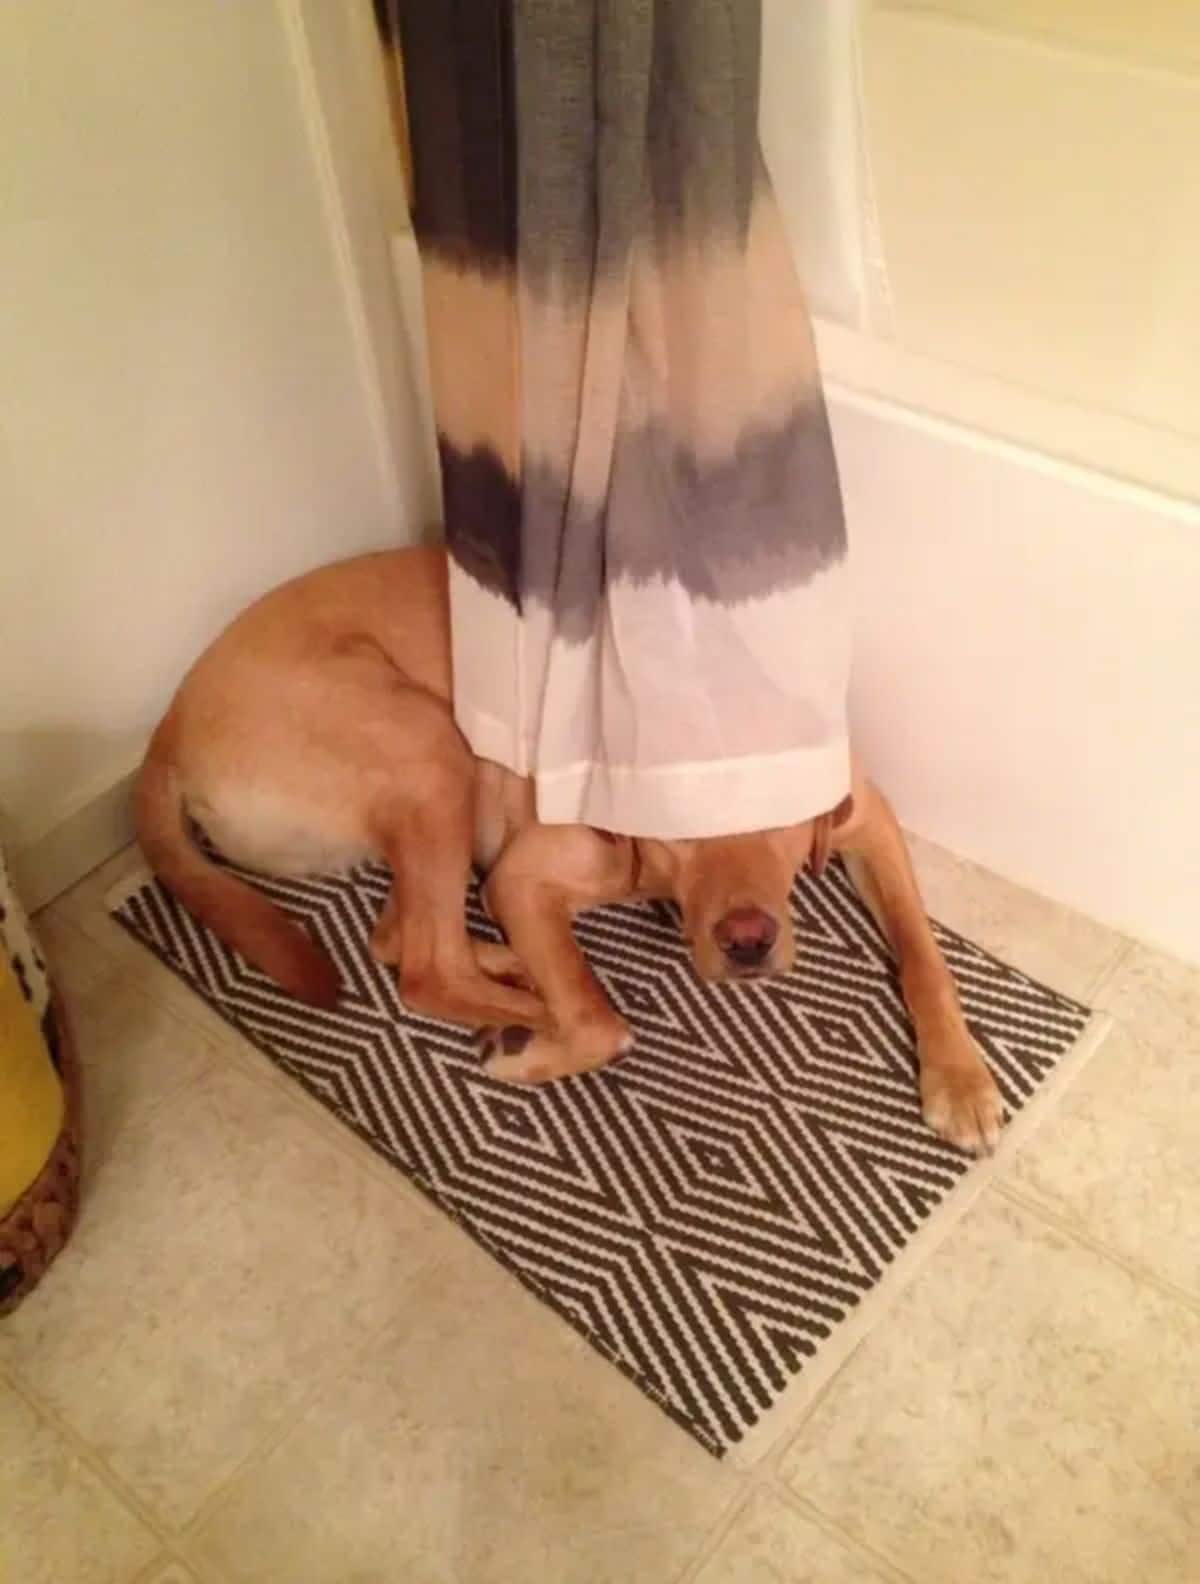 yellow labrador laying on a brown and white patterned rug in a bathroom with the eyes hidden behind a black, brown and white shower curtain